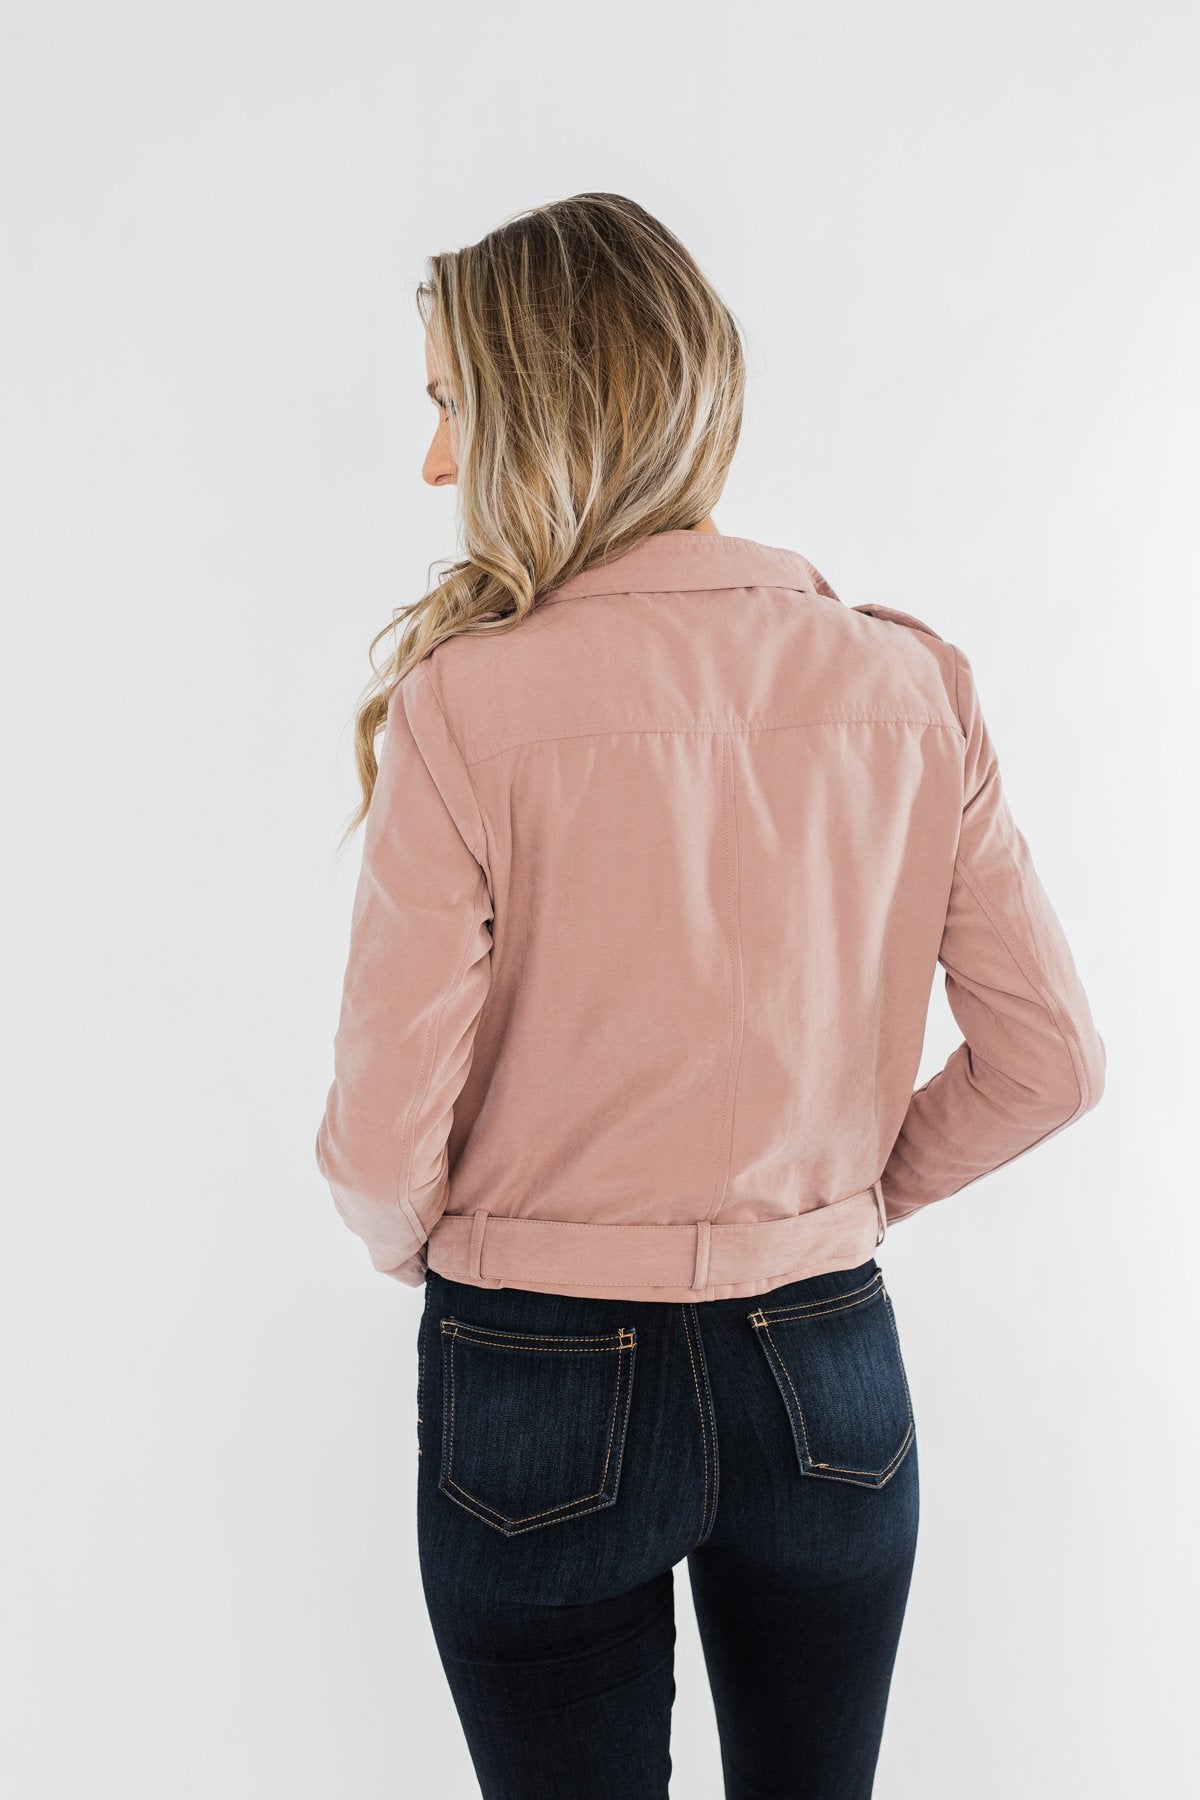 Lost In Your Eyes Lightweight Jacket- Light Dusty Mauve